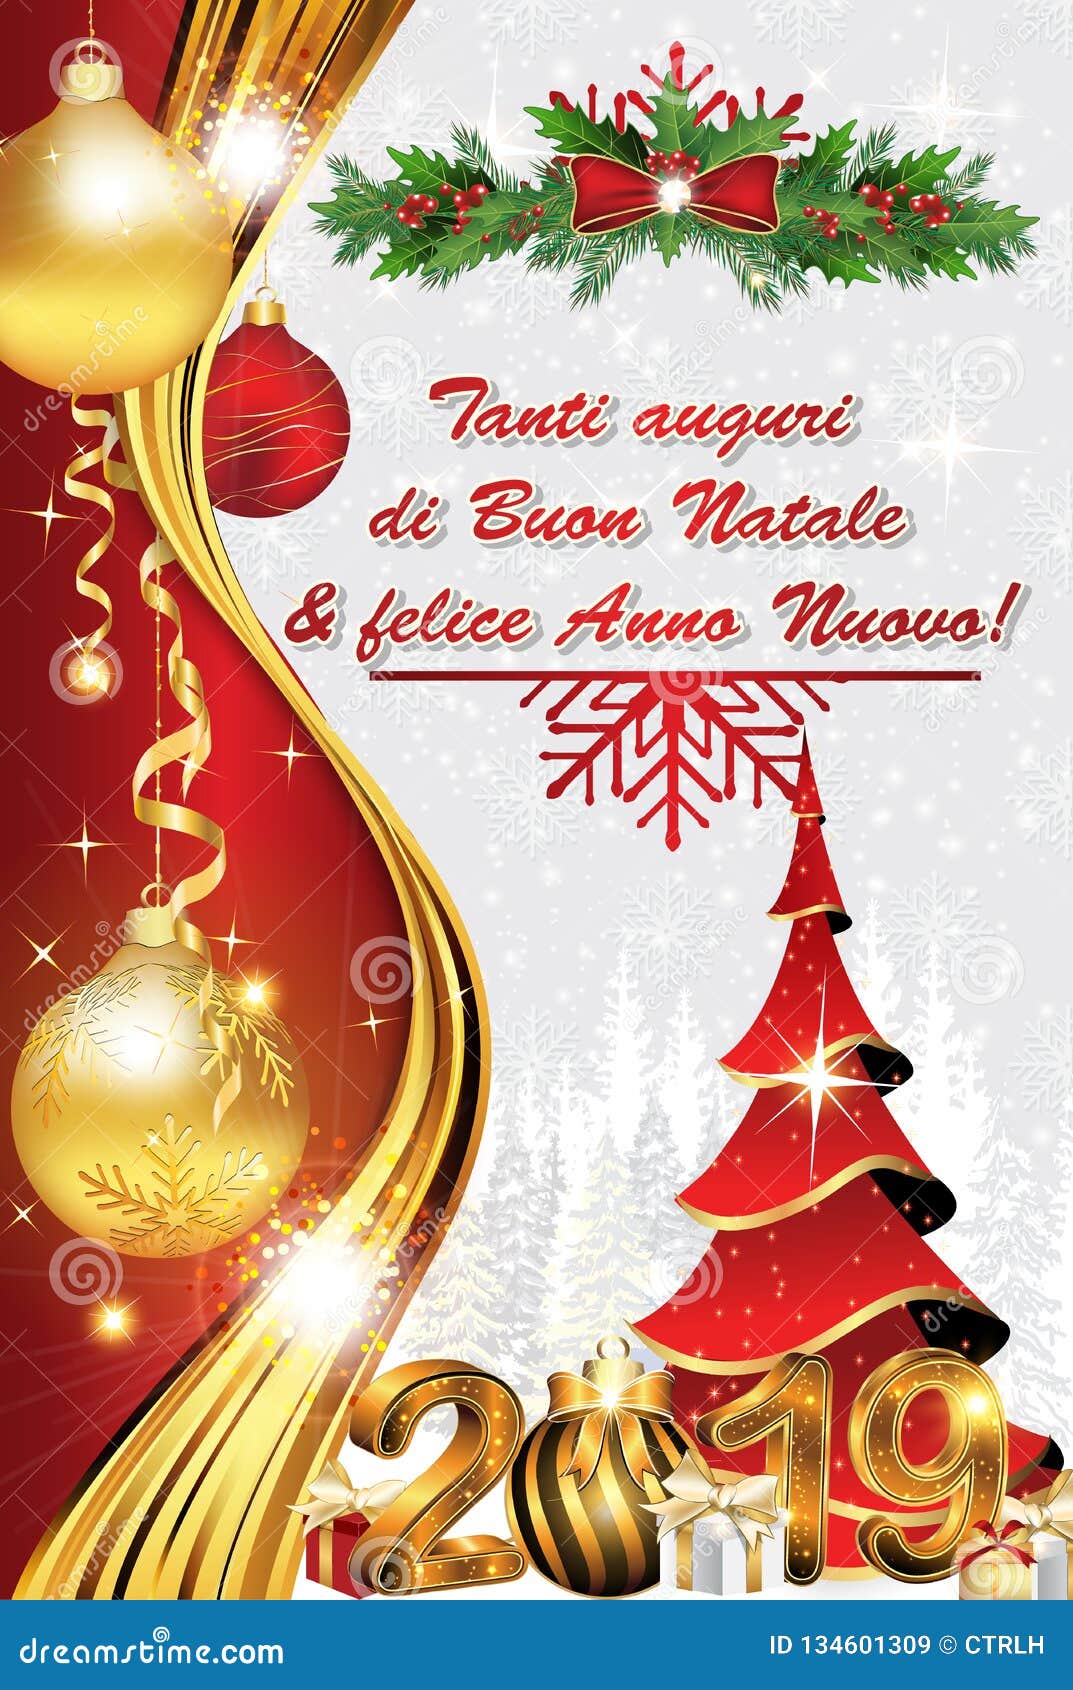 Buon Natale Translation.Italian Greeting Card With Classic Design Merry Christmas And Happy New Year Stock Illustration Illustration Of Companies Jingle 134601309